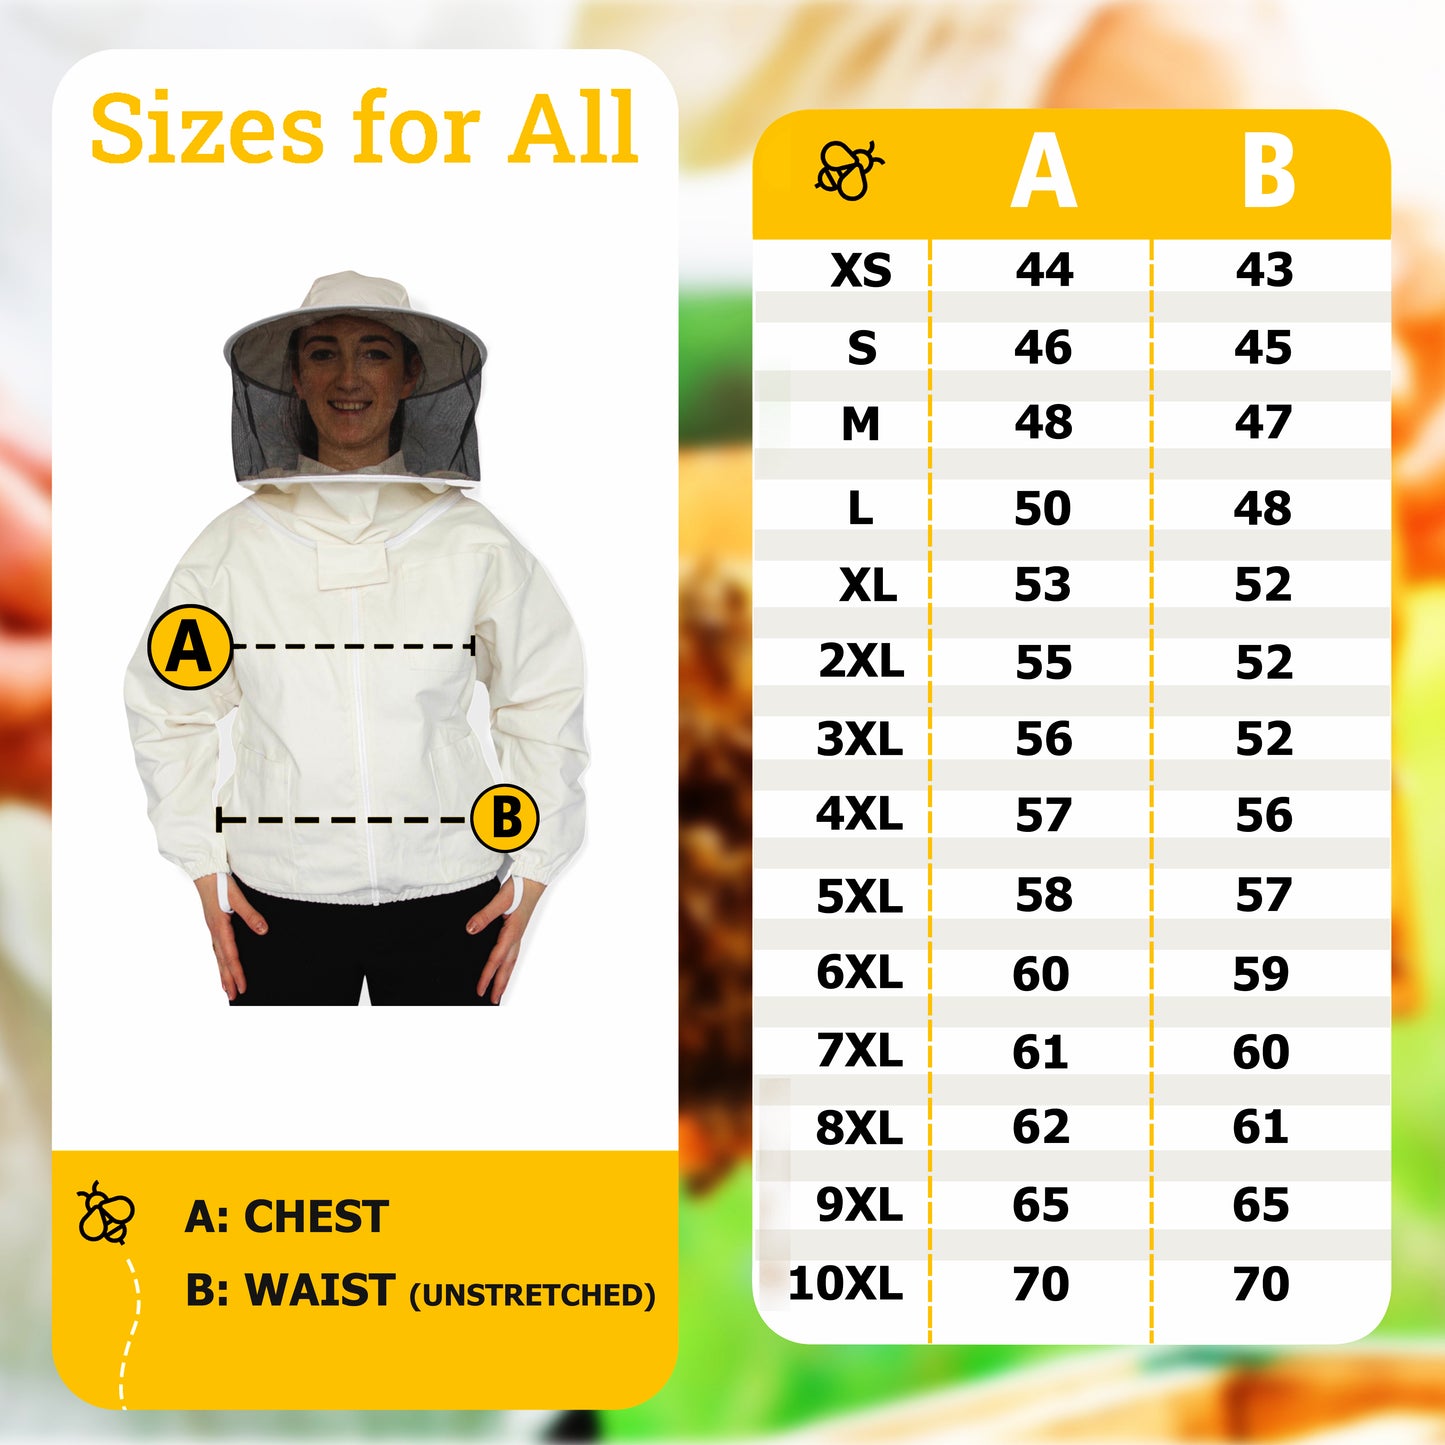 Thick Cotton Sting-Proof Beekeeping Jackets | Beeattire